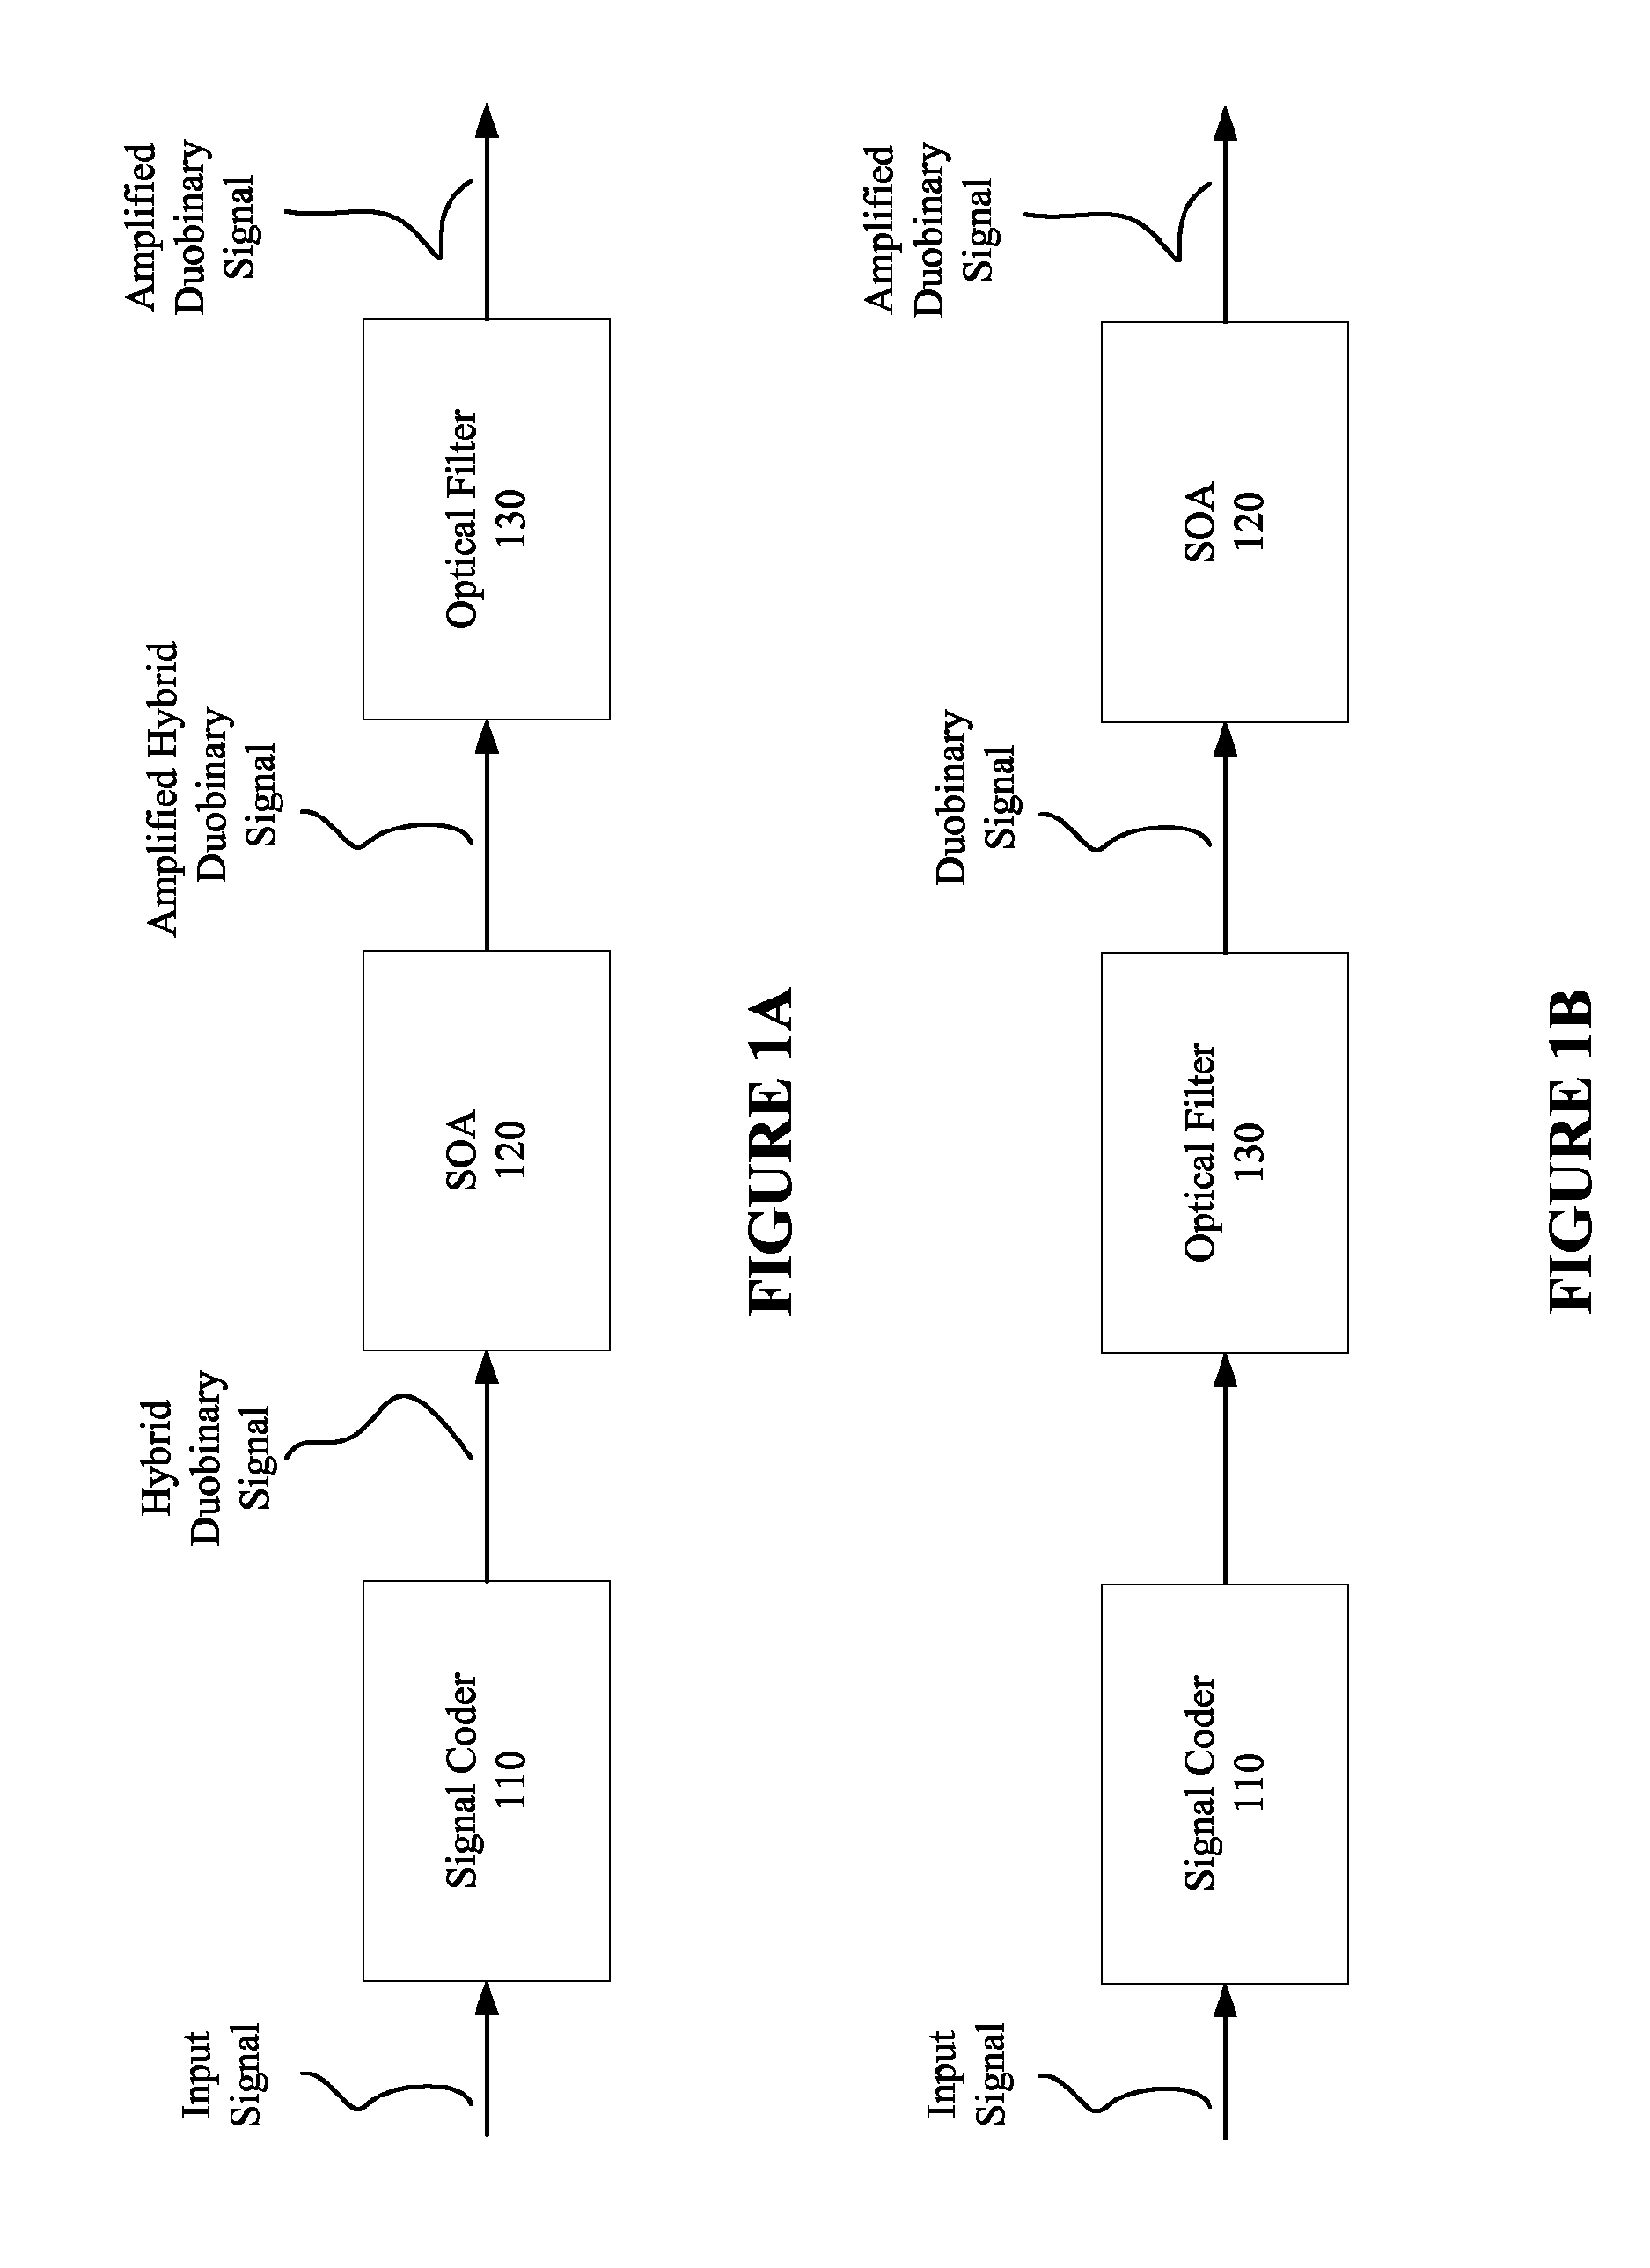 Optical shaping for amplification in a semiconductor optical amplifier